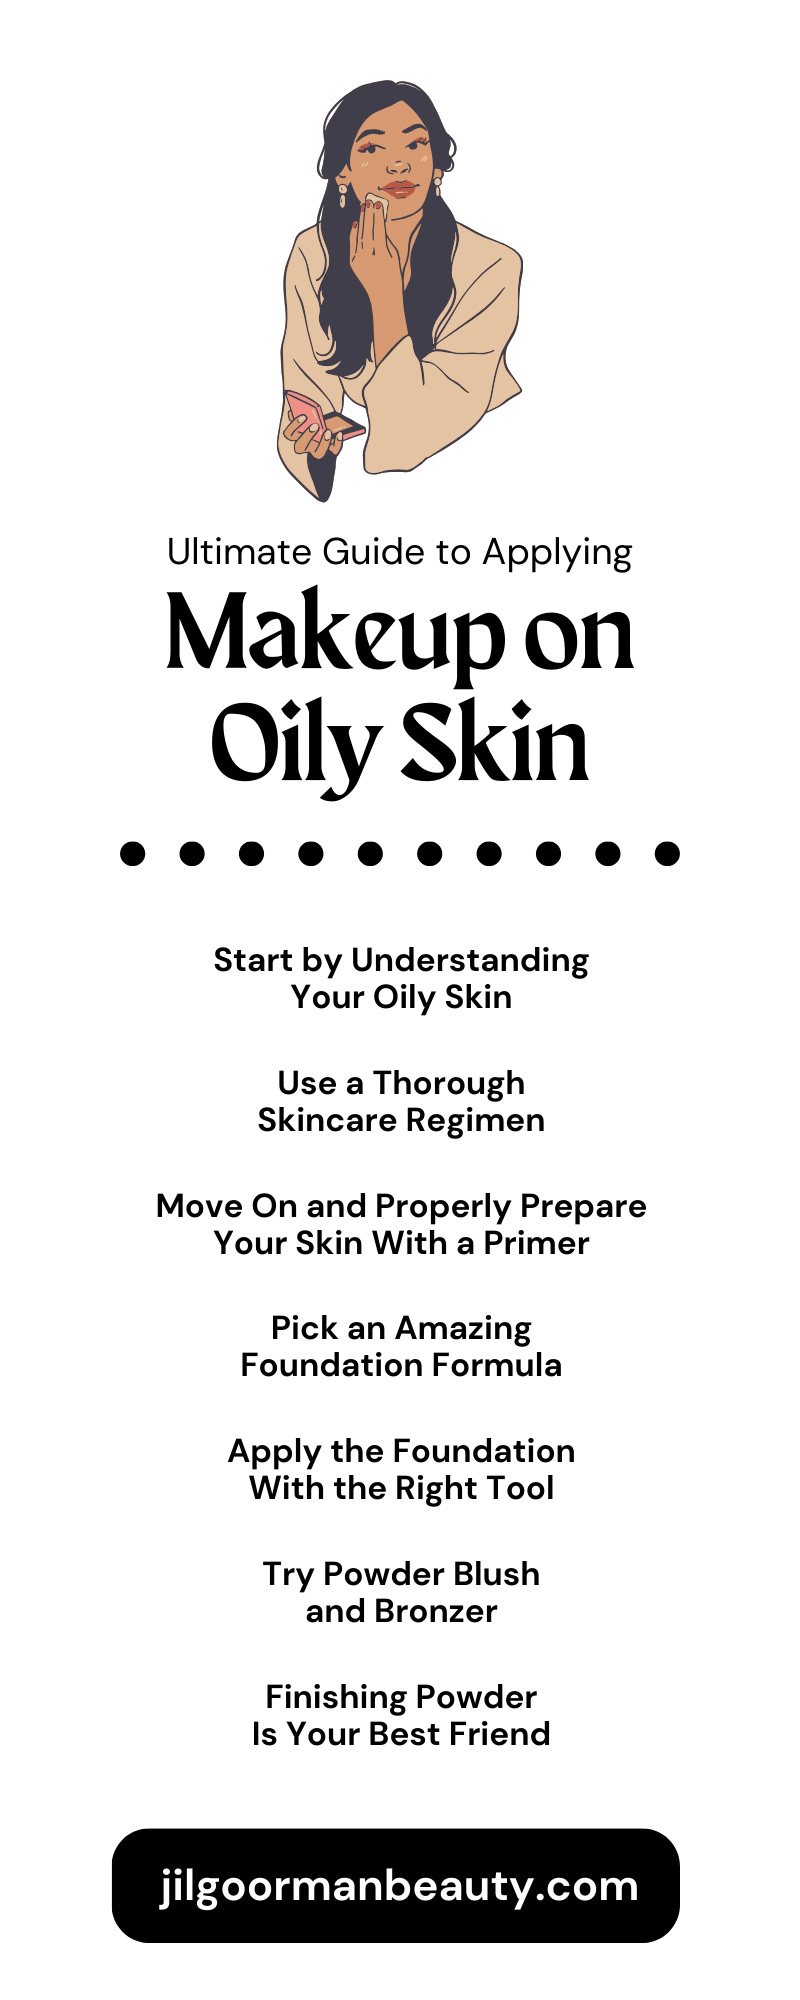 Ultimate Guide to Applying Makeup on Oily Skin